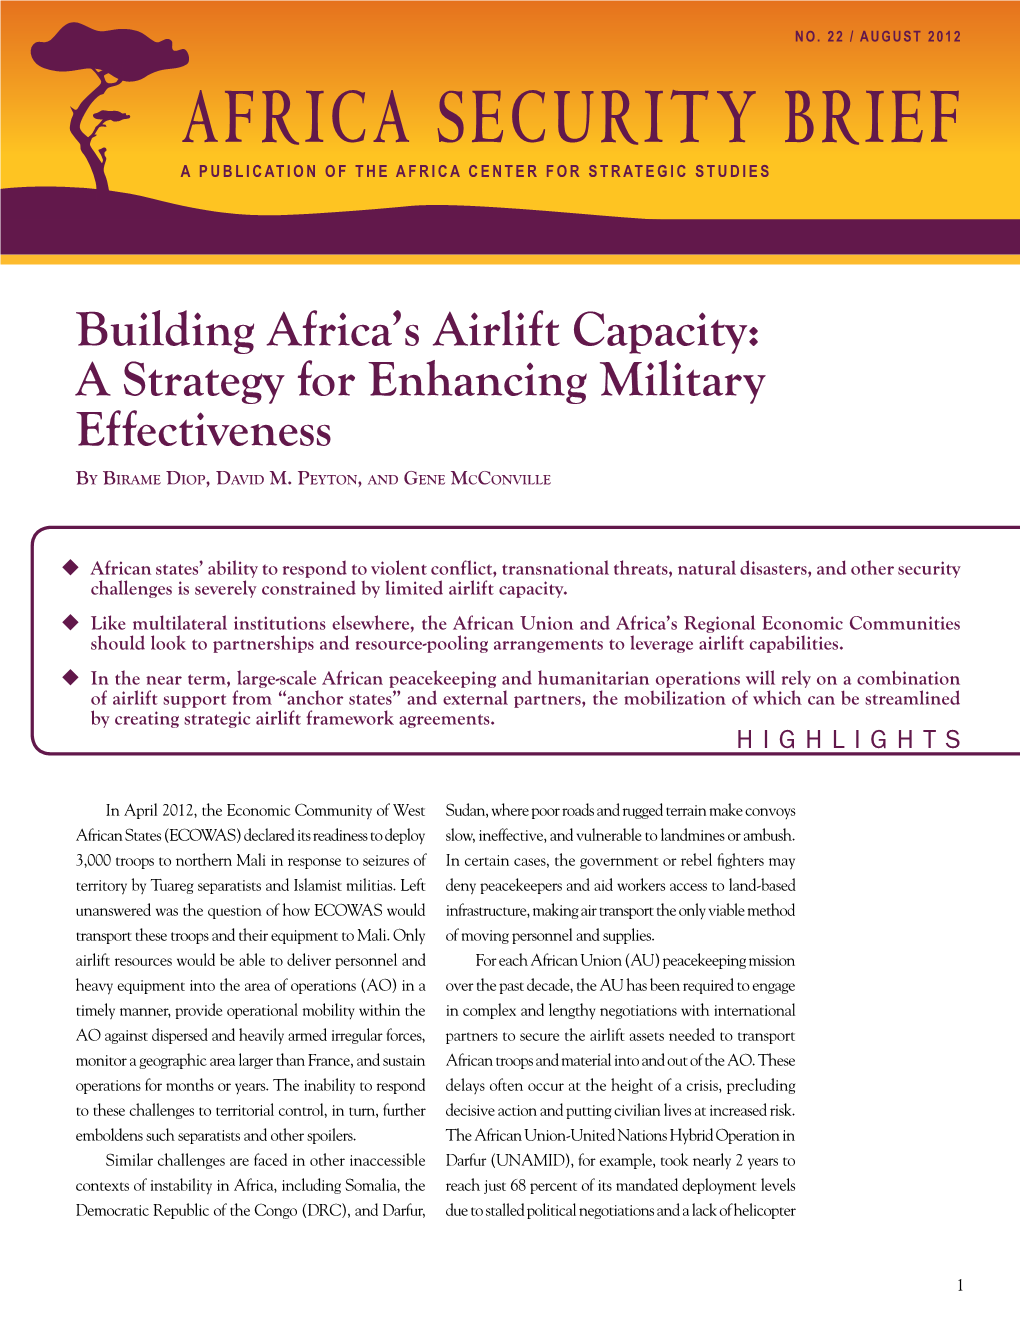 Building Africa's Airlift Capacity